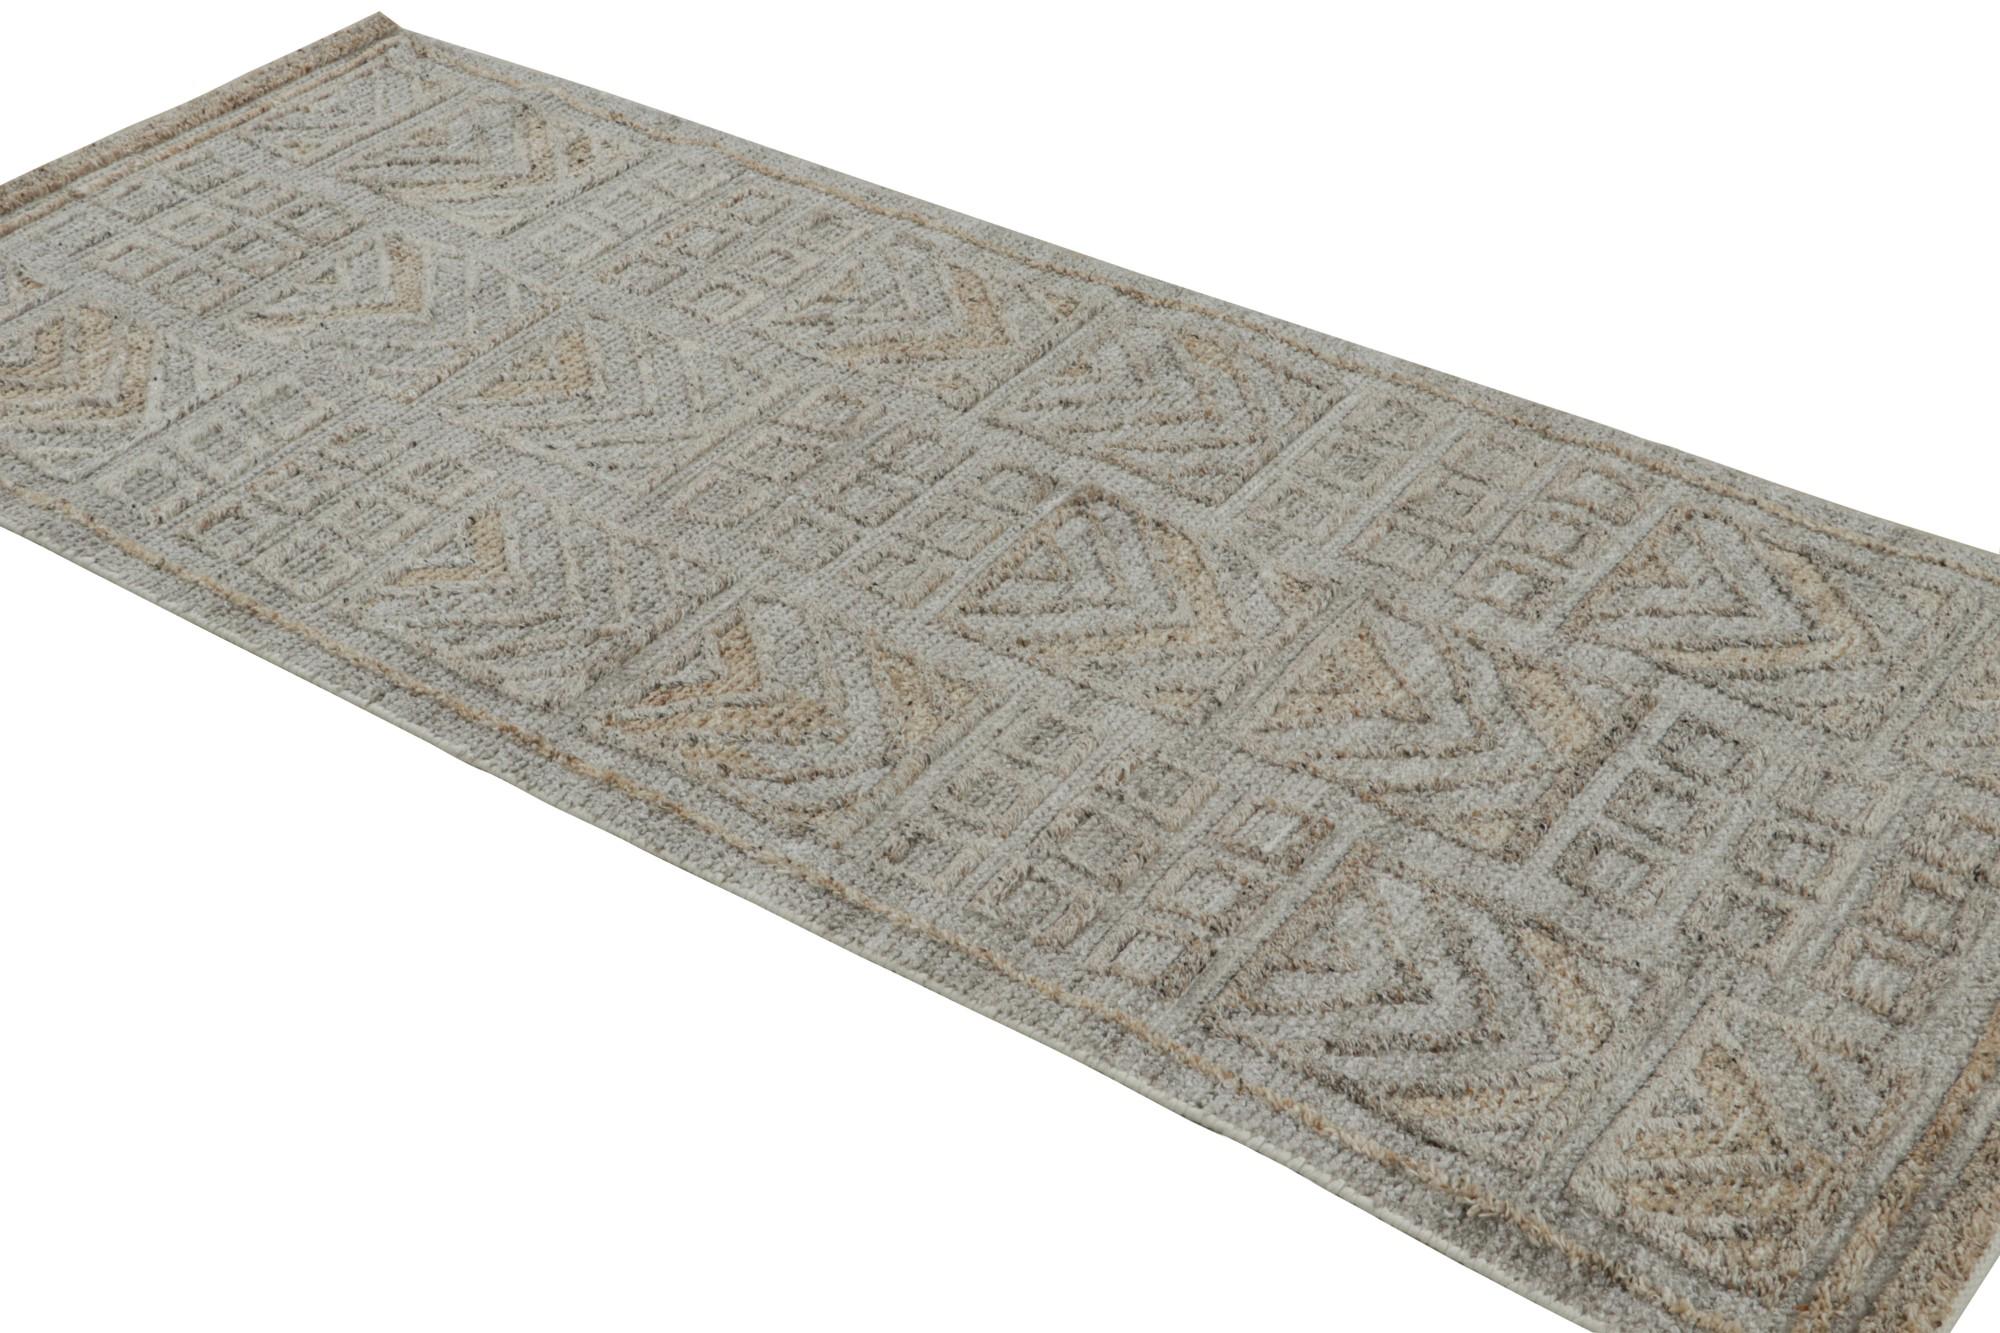 This 3×8 indoor-outdoor runner is a bold new addition to the Scandinavian Collection by Rug & Kilim. Hand-knotted in performance polyester, its design reflects a contemporary take on Swedish Deco style.

On the Design:

This rug enjoys an intricate